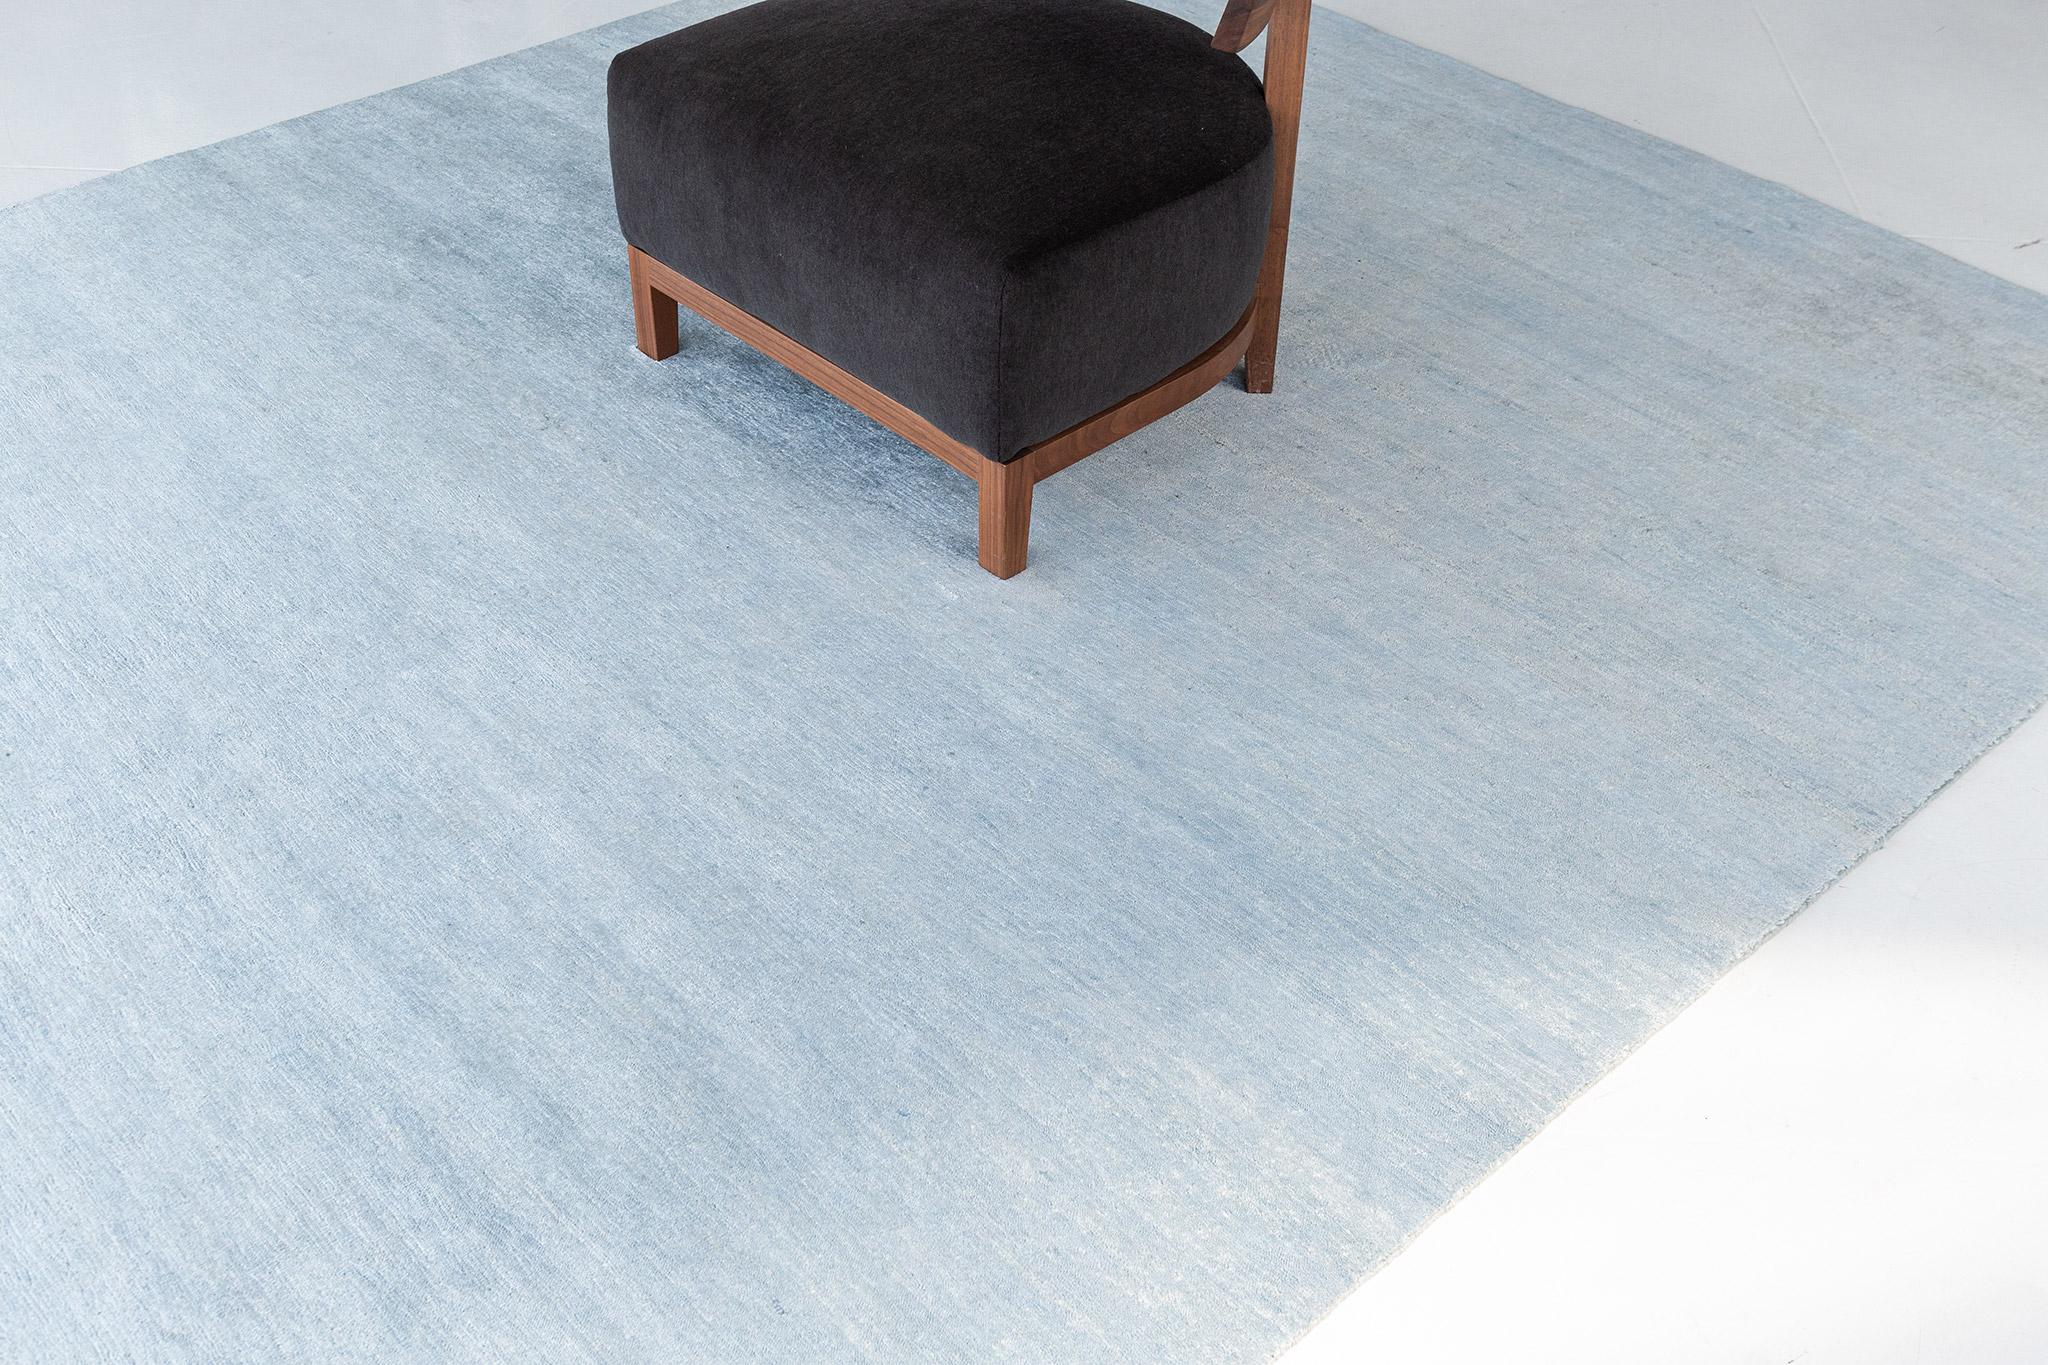 Dara' is a solid bamboo silk rug in the stunning cool sky blue tones. Its simplicity does not take away from the rug's luxurious quality and beautiful sheen. Dara is a splendid rug for any design space.

Rug Number
24585
Size
7' 5